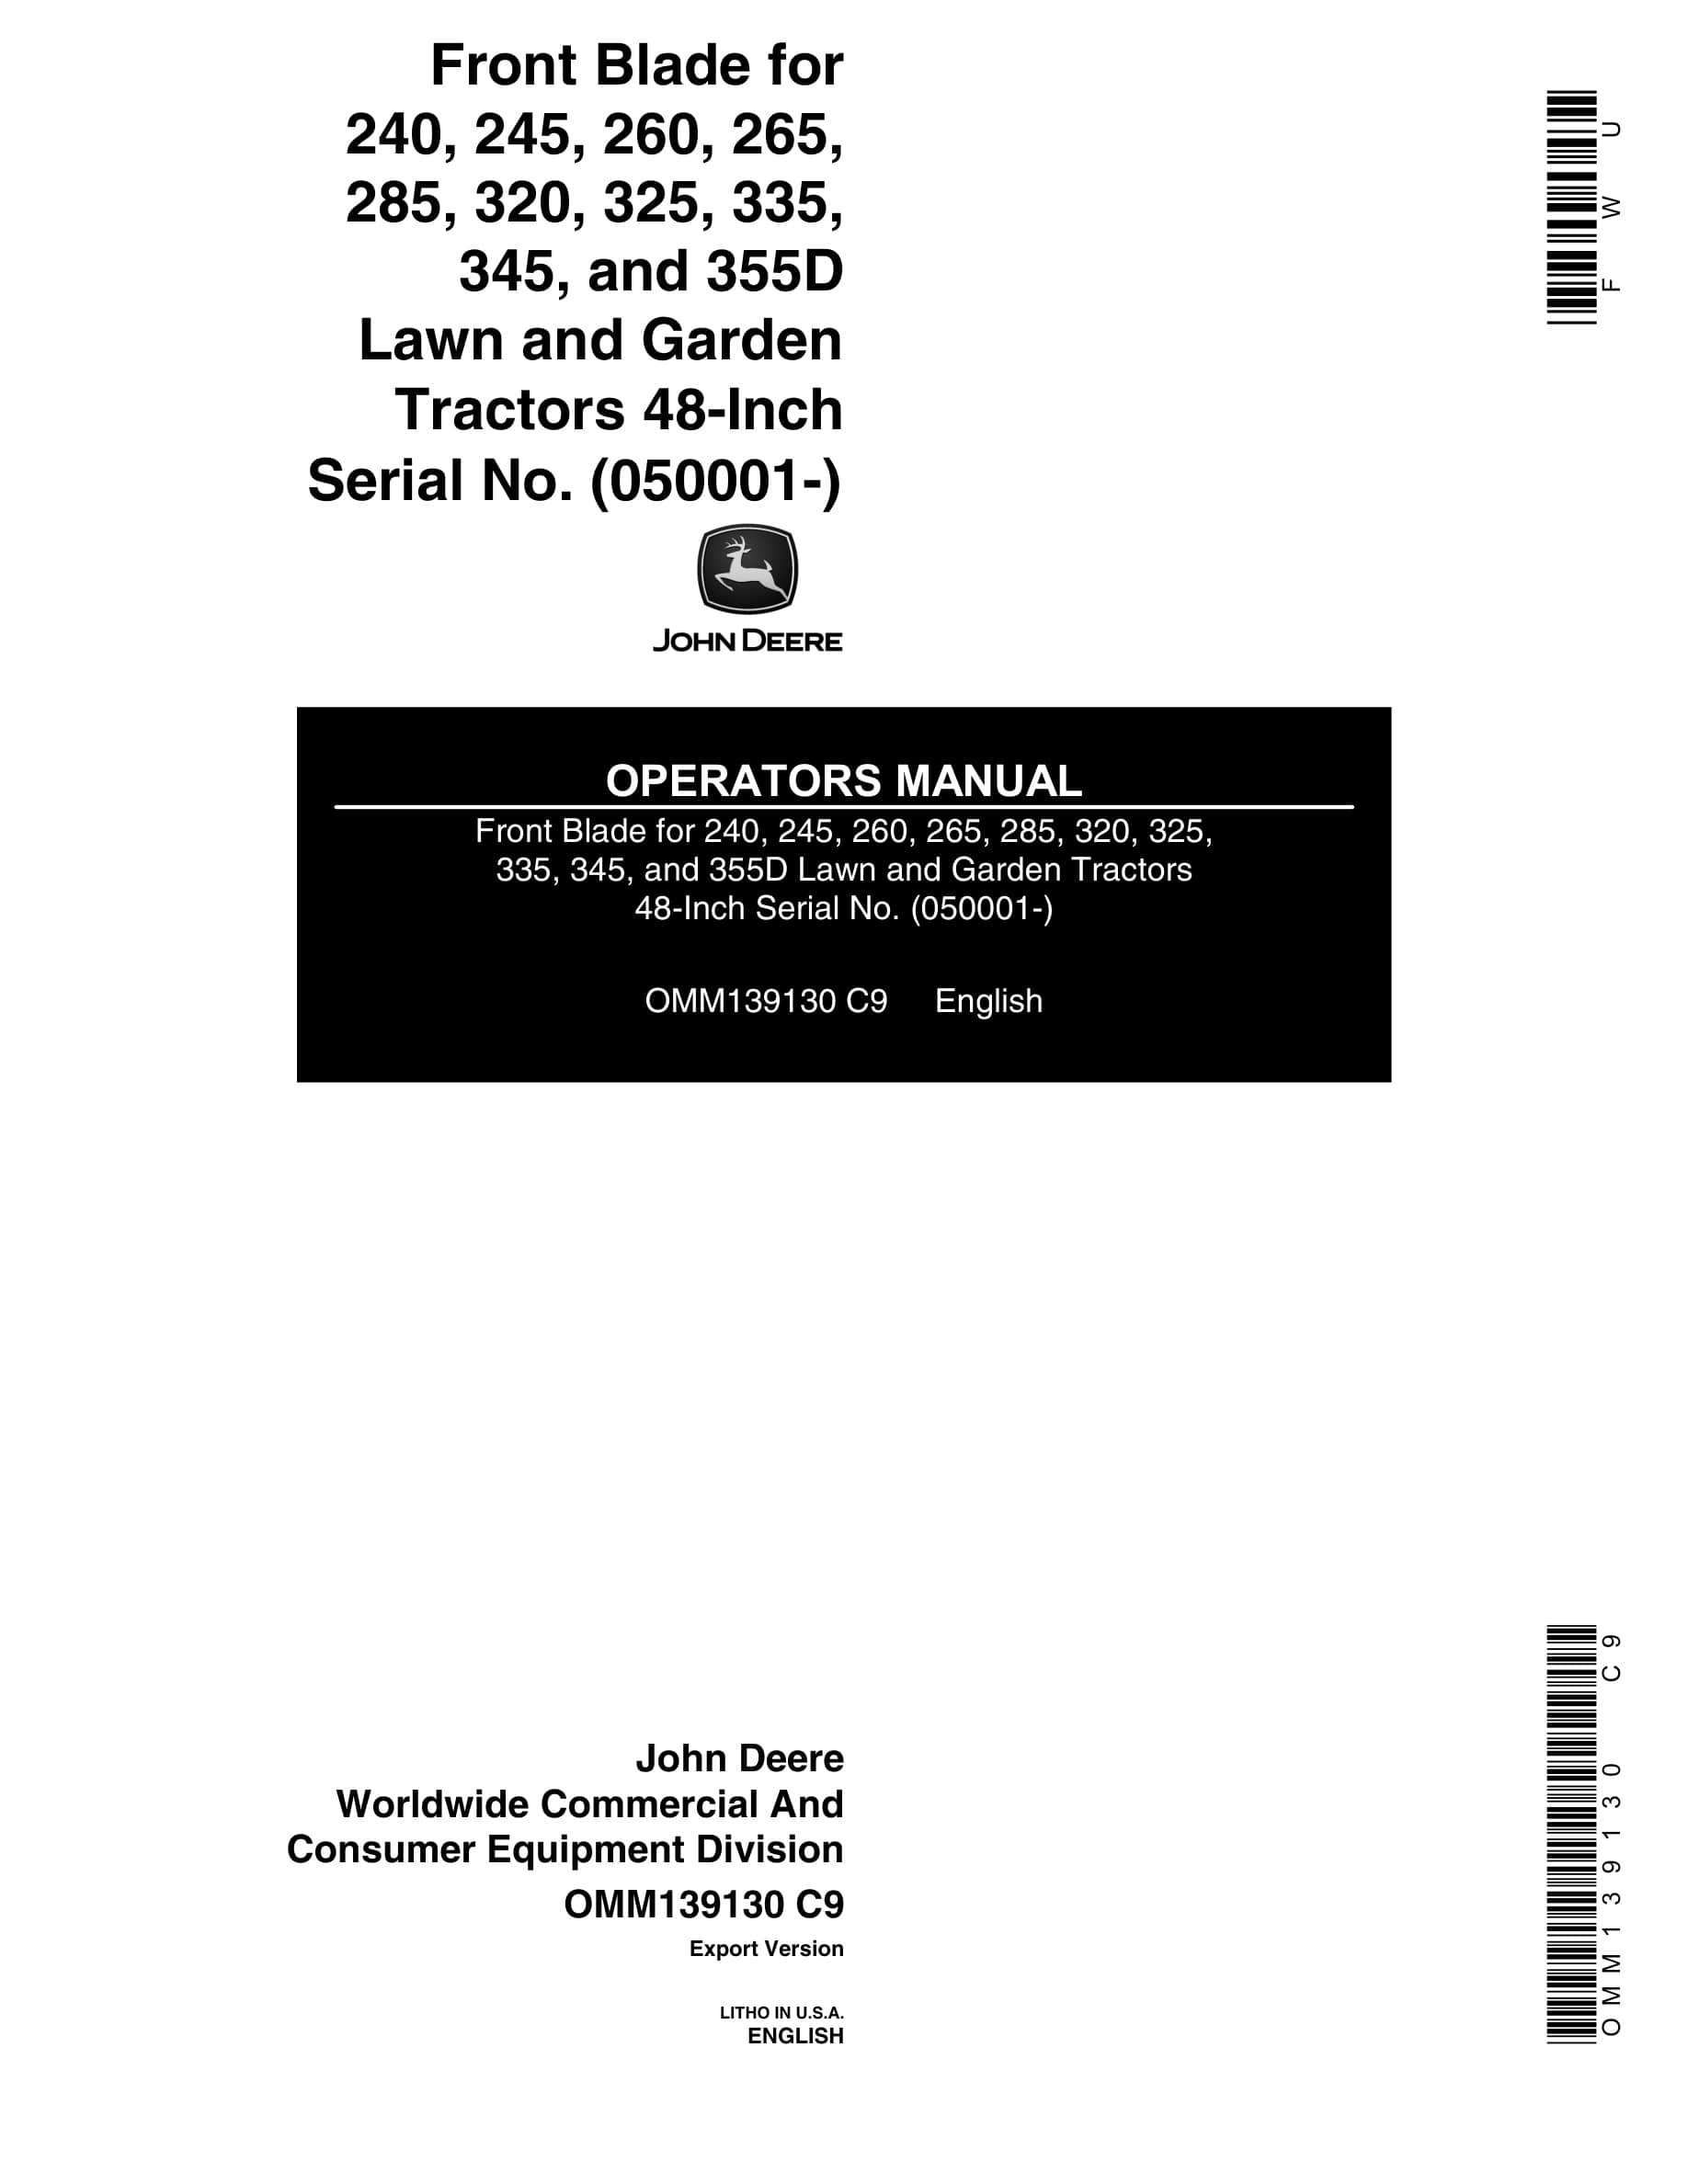 John Deere Front Blade For 240, 245, 260, 265, 285, 320, 325,335, 345, And 355d Lawn And Garden Tractors Operator Manuals 48-inch OMM139130-1